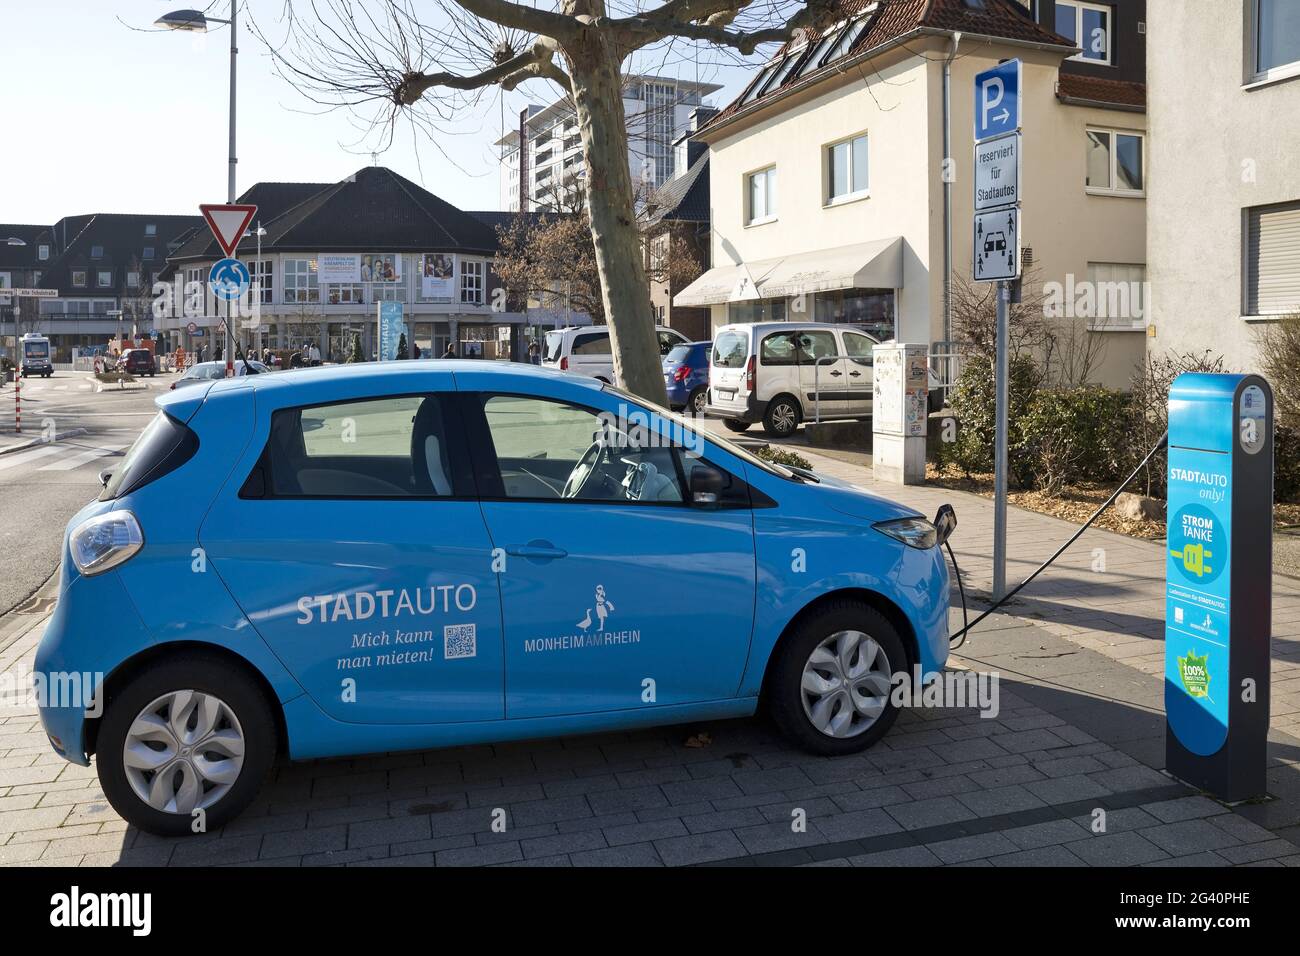 Electric car being charged as a city car for rent, Monheim am Rhein, Germany, Europe Stock Photo